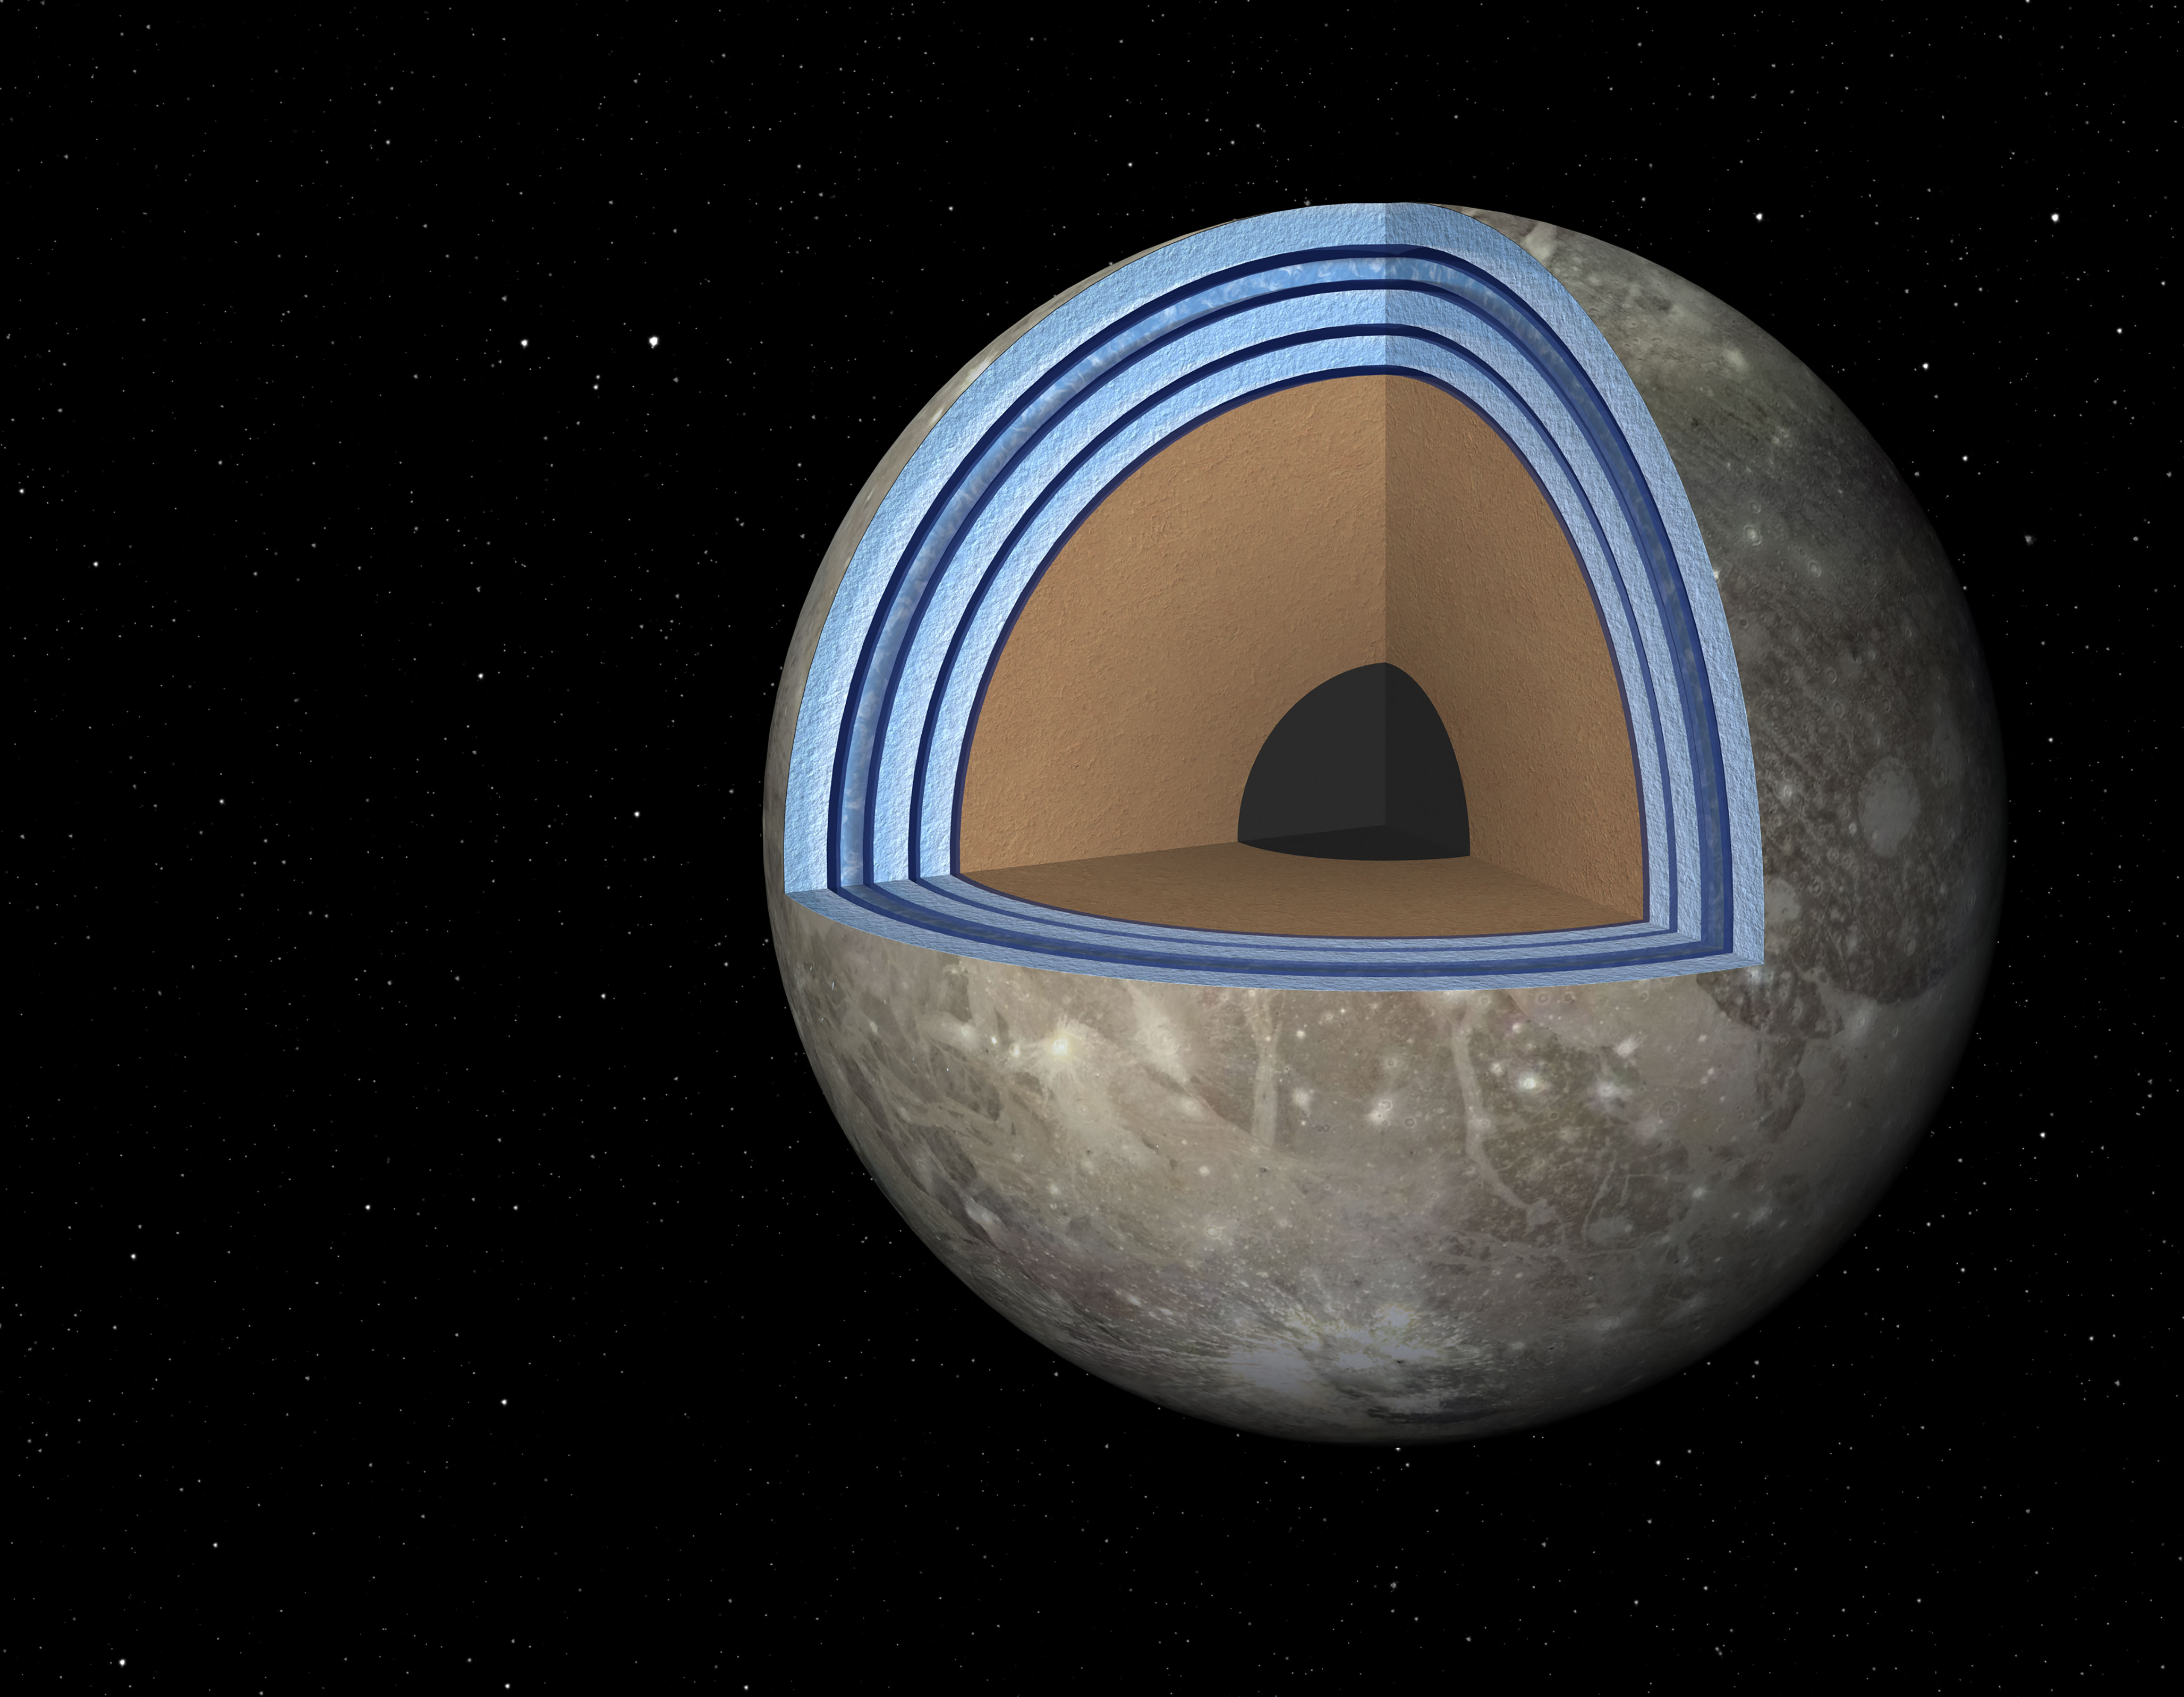 This artist's concept of Jupiter's moon Ganymede, the largest moon in the solar system, illustrates the "club sandwich" model of its interior oceans. Credit: NASA/JPL-Caltech